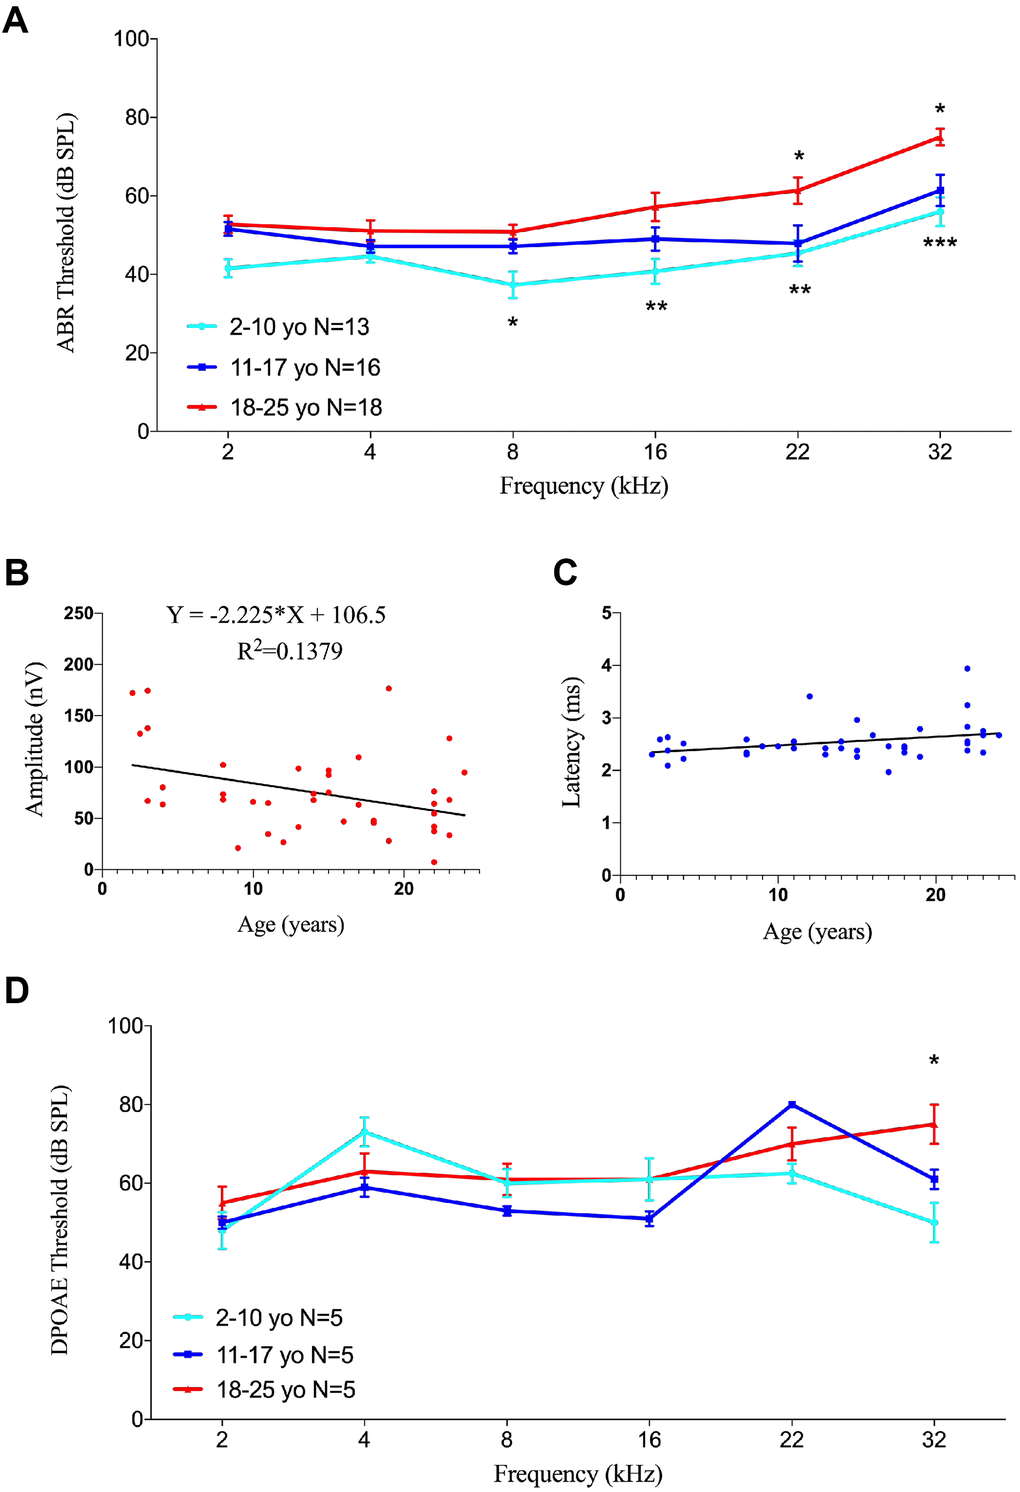 Effects of age on auditory function in rhesus monkeys. (A) Age-related changes in auditory thresholds determined by ABR. Data are presented as mean ± SEM. Significant differences in ABR threshold between the groups are marked. Compared to 2-10 year-old animals, ABR thresholds increased in aging rhesus monkeys from 8-32 kHz. ABR thresholds increased at 22 and 32 kHz compared aging monkeys with 11-17 y.o. ones. *P B) Scatter plot and corresponding regression line and regression equation for the relationship between ABR amplitudes (nV) and ages (years) of 40 individual rhesus monkeys at a frequency of tone burst stimuli of 22 kHz (R-squared linear= 0.1379, P=0.0183). (C) Scatter plot and corresponding regression line and regression equation for the relationship between ABR latencies (ms) and ages (years) of the 40 rhesus monkeys at a frequency of 22 kHz (R-squared linear= 0.1010, P=0.0456). (D) Association between age and auditory thresholds determined by DPOAE in rhesus monkeys. Data are presented as mean ± SEM. *P 